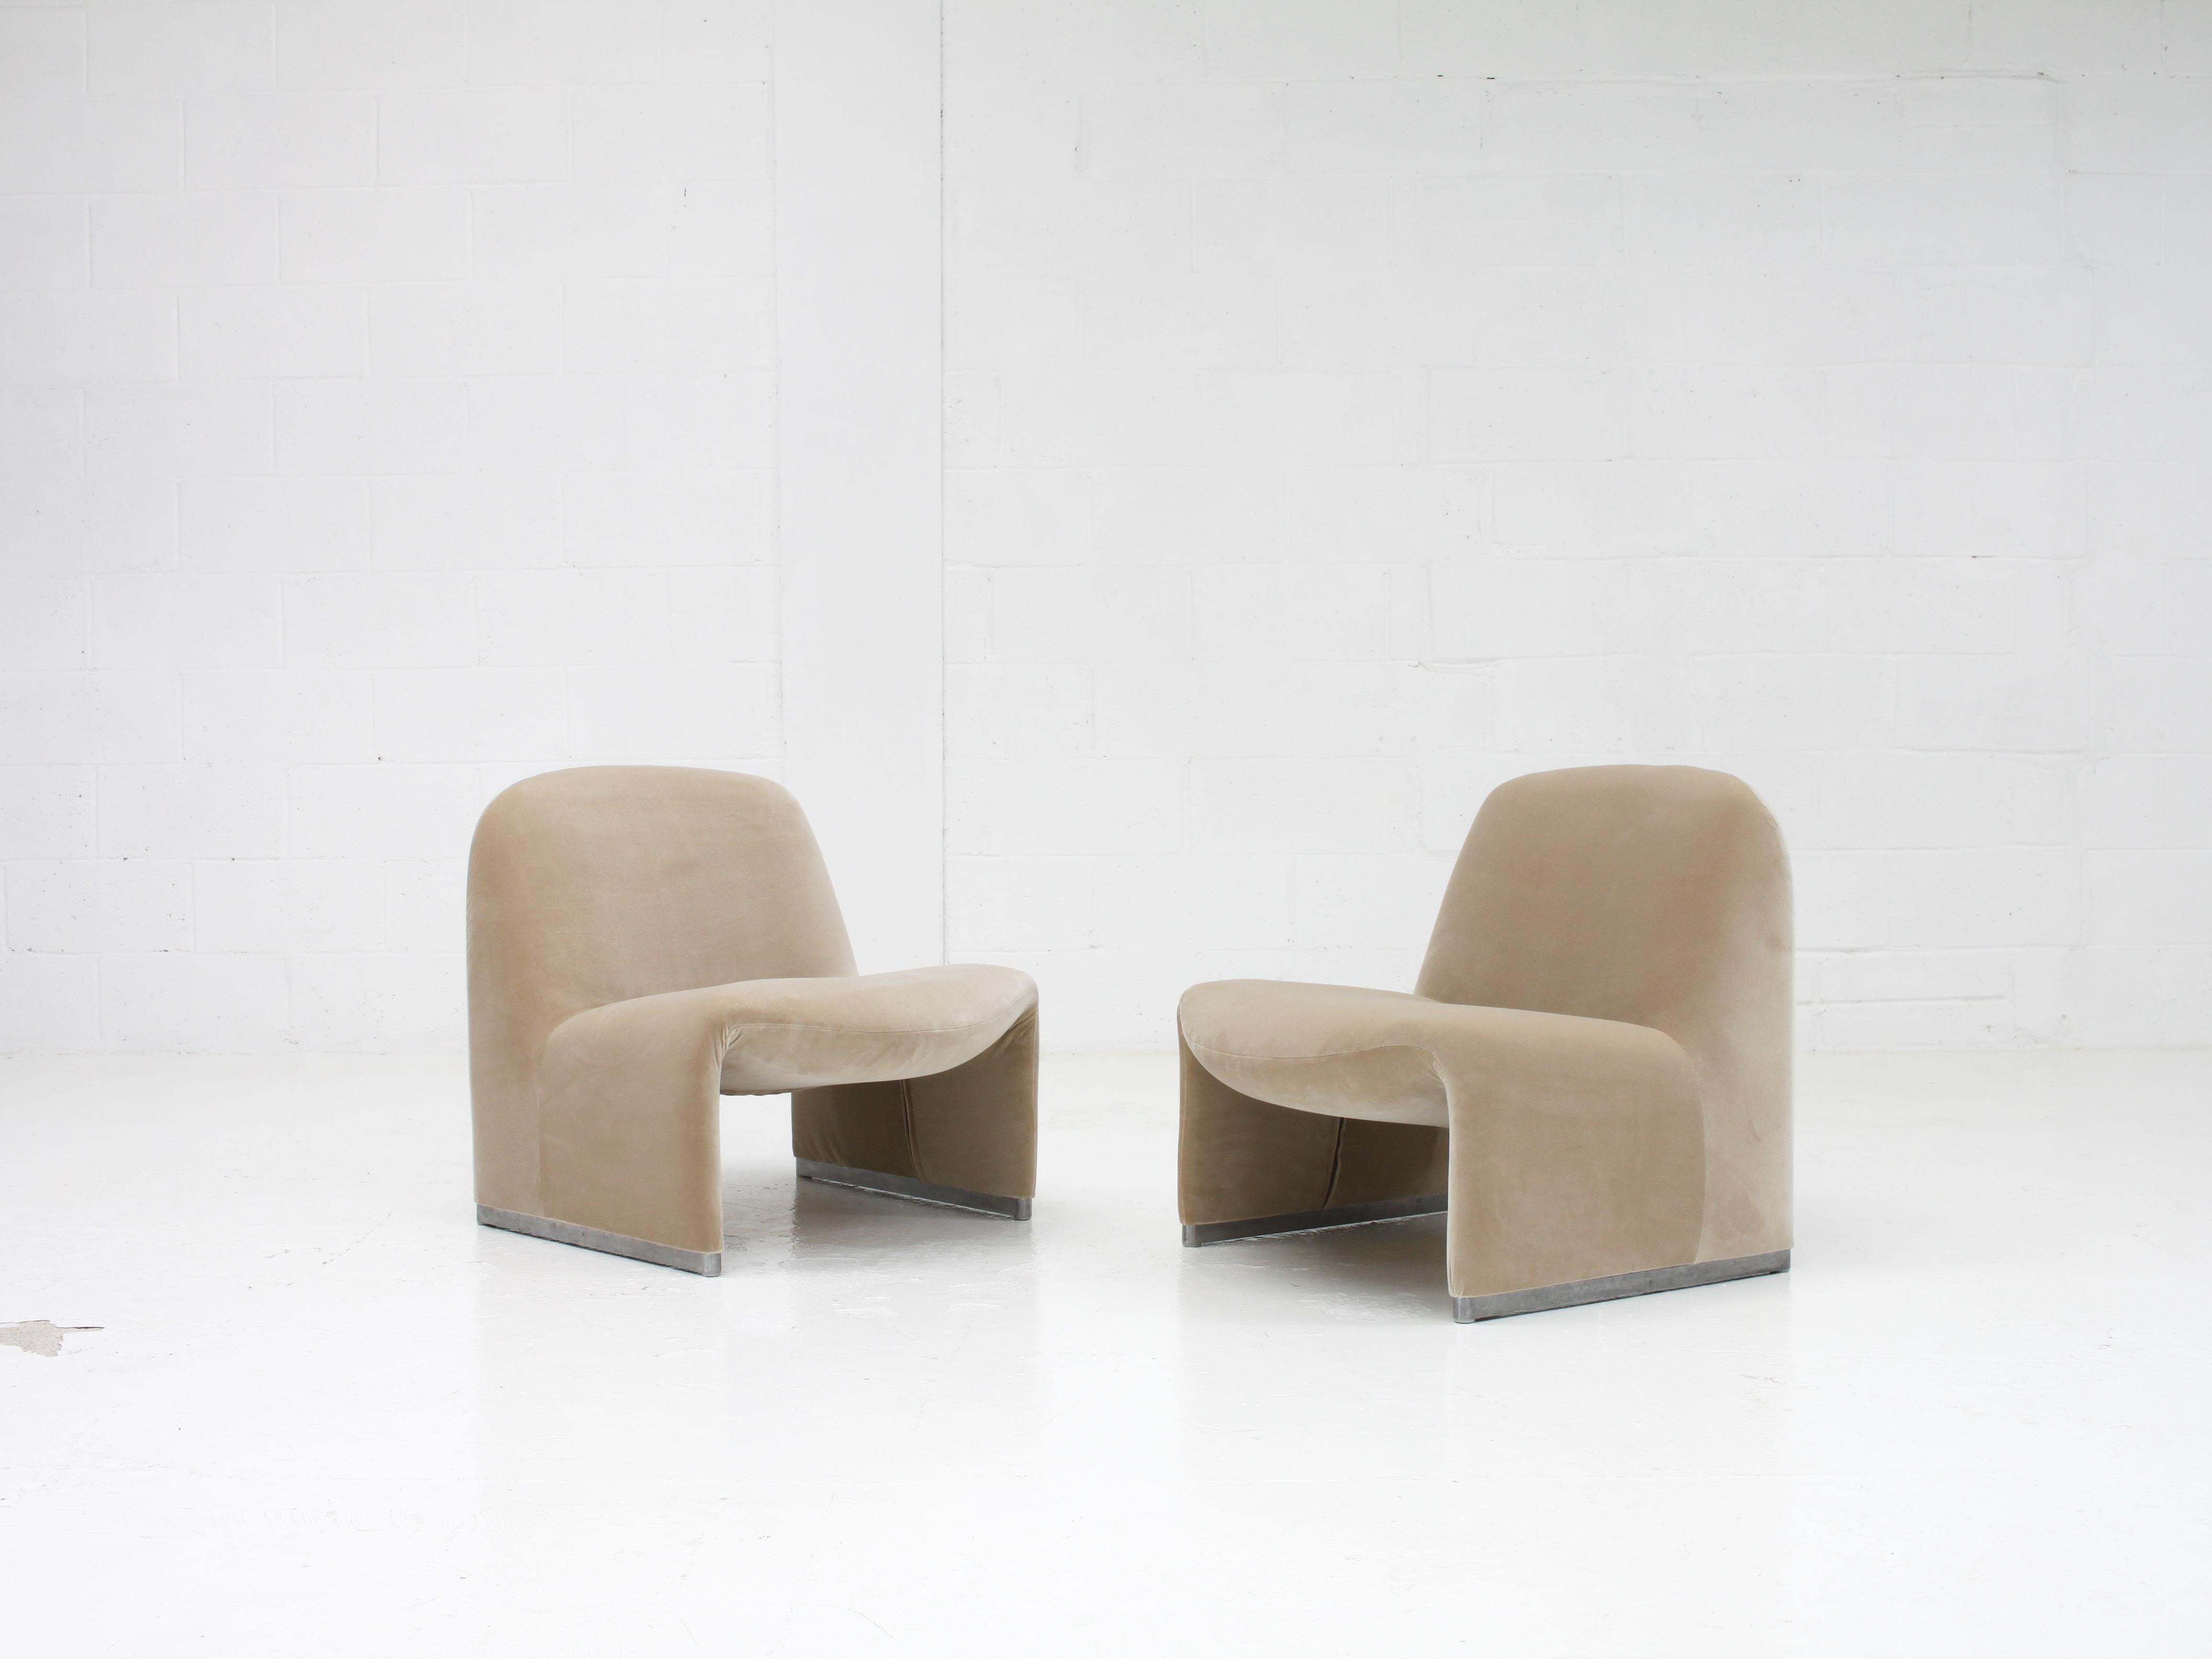 A pair of Giancarlo Piretti “Alky” chairs prepared for customer own upholstery.  

*Photos are for reference only* - chairs supplied will be prepared for upholstery only, we will review foam and repair any areas where necessary, the chairs will be